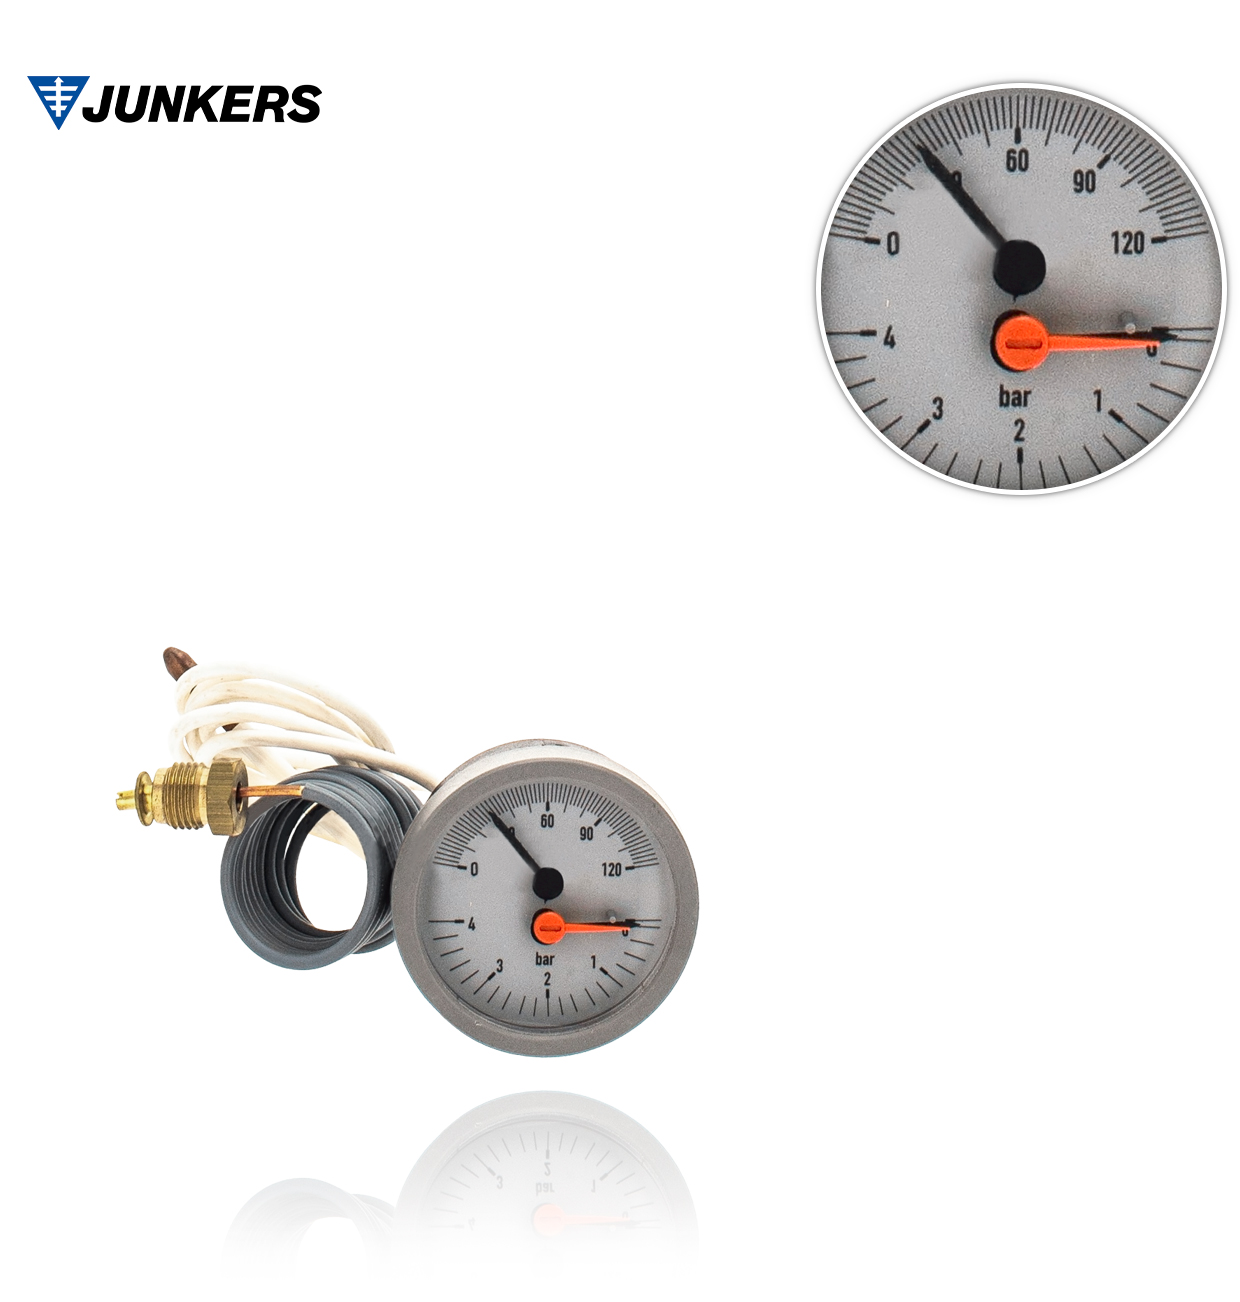 JUNKERS 8716142308 THERMOMANOMETER